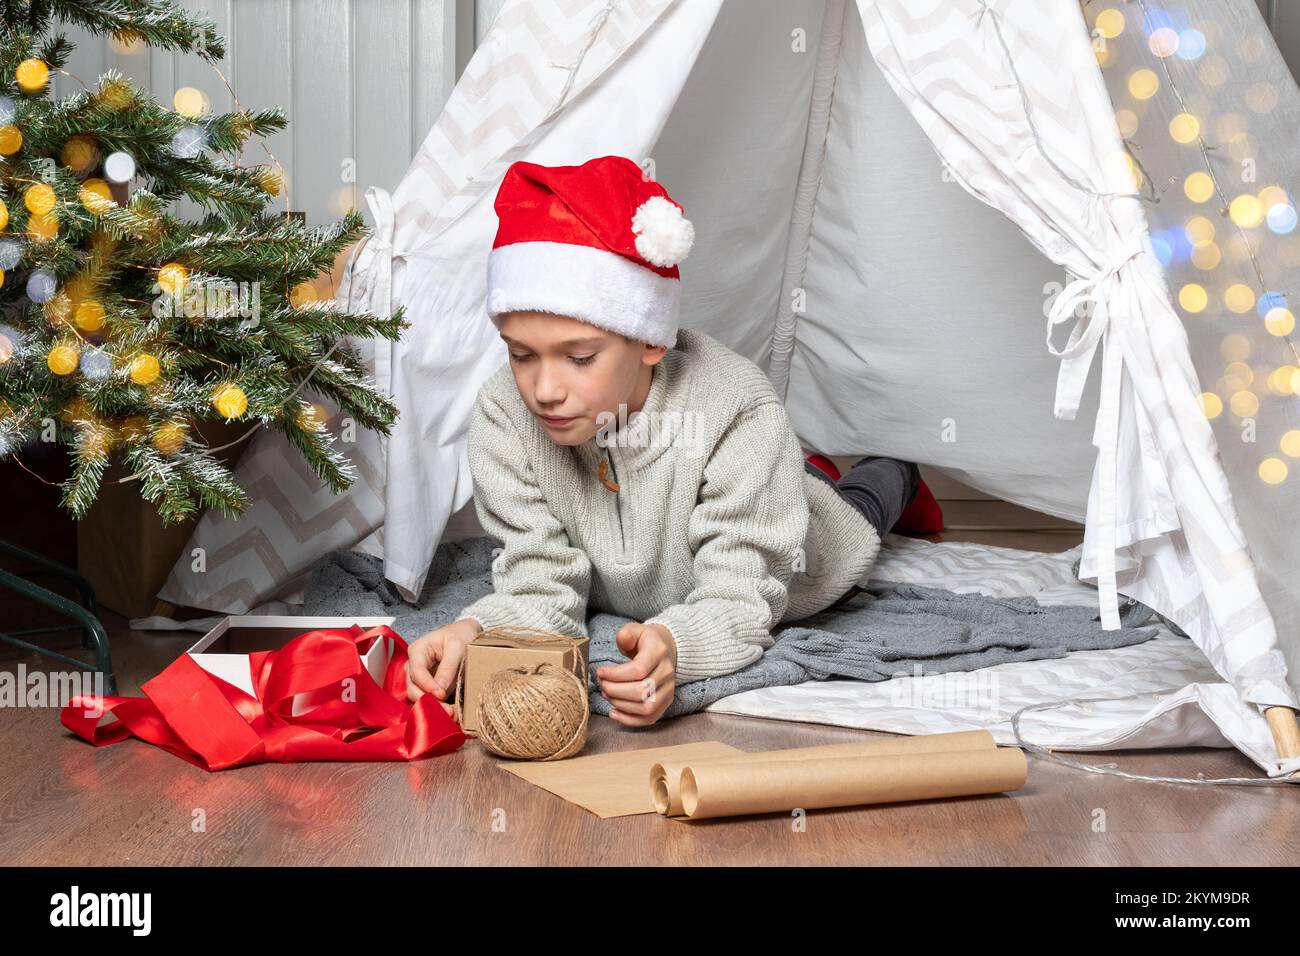 A child in a red Santa hat wraps Christmas gifts surprises in kraft paper with a rope, red ribbons. A teen boy lying in a children's tent is packing g Stock Photo